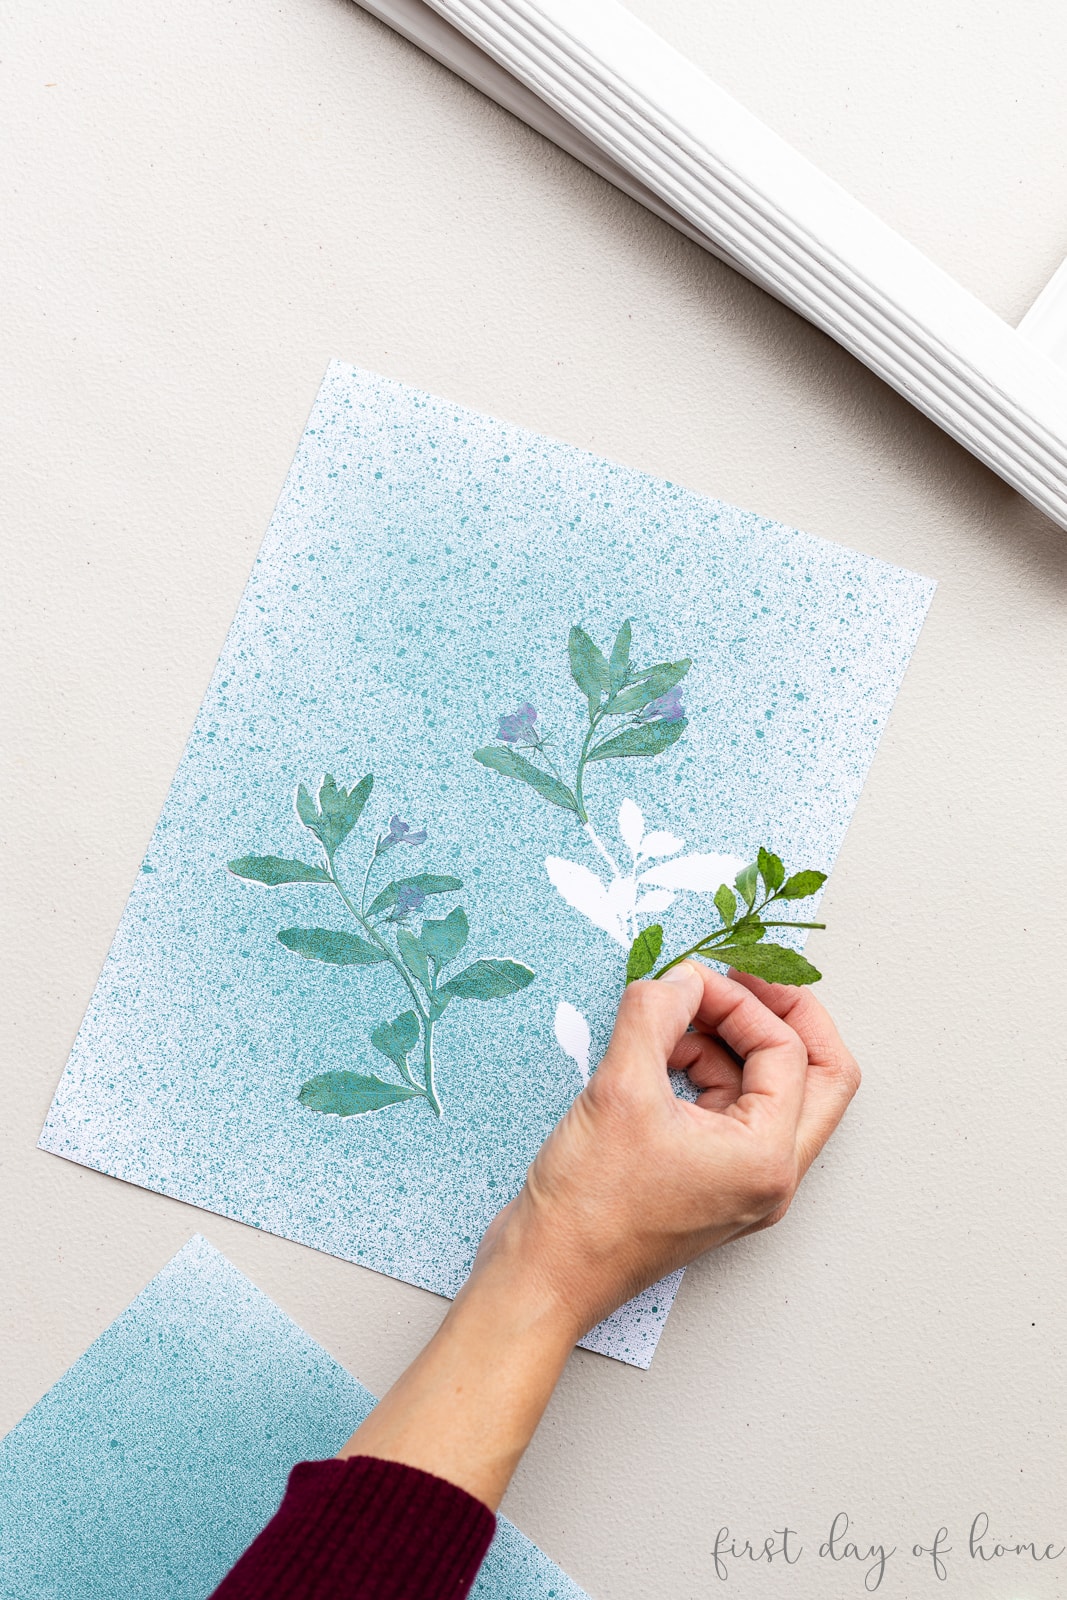 Removing pressed flowers from paper after spray painting to reveal flower silhouette underneath